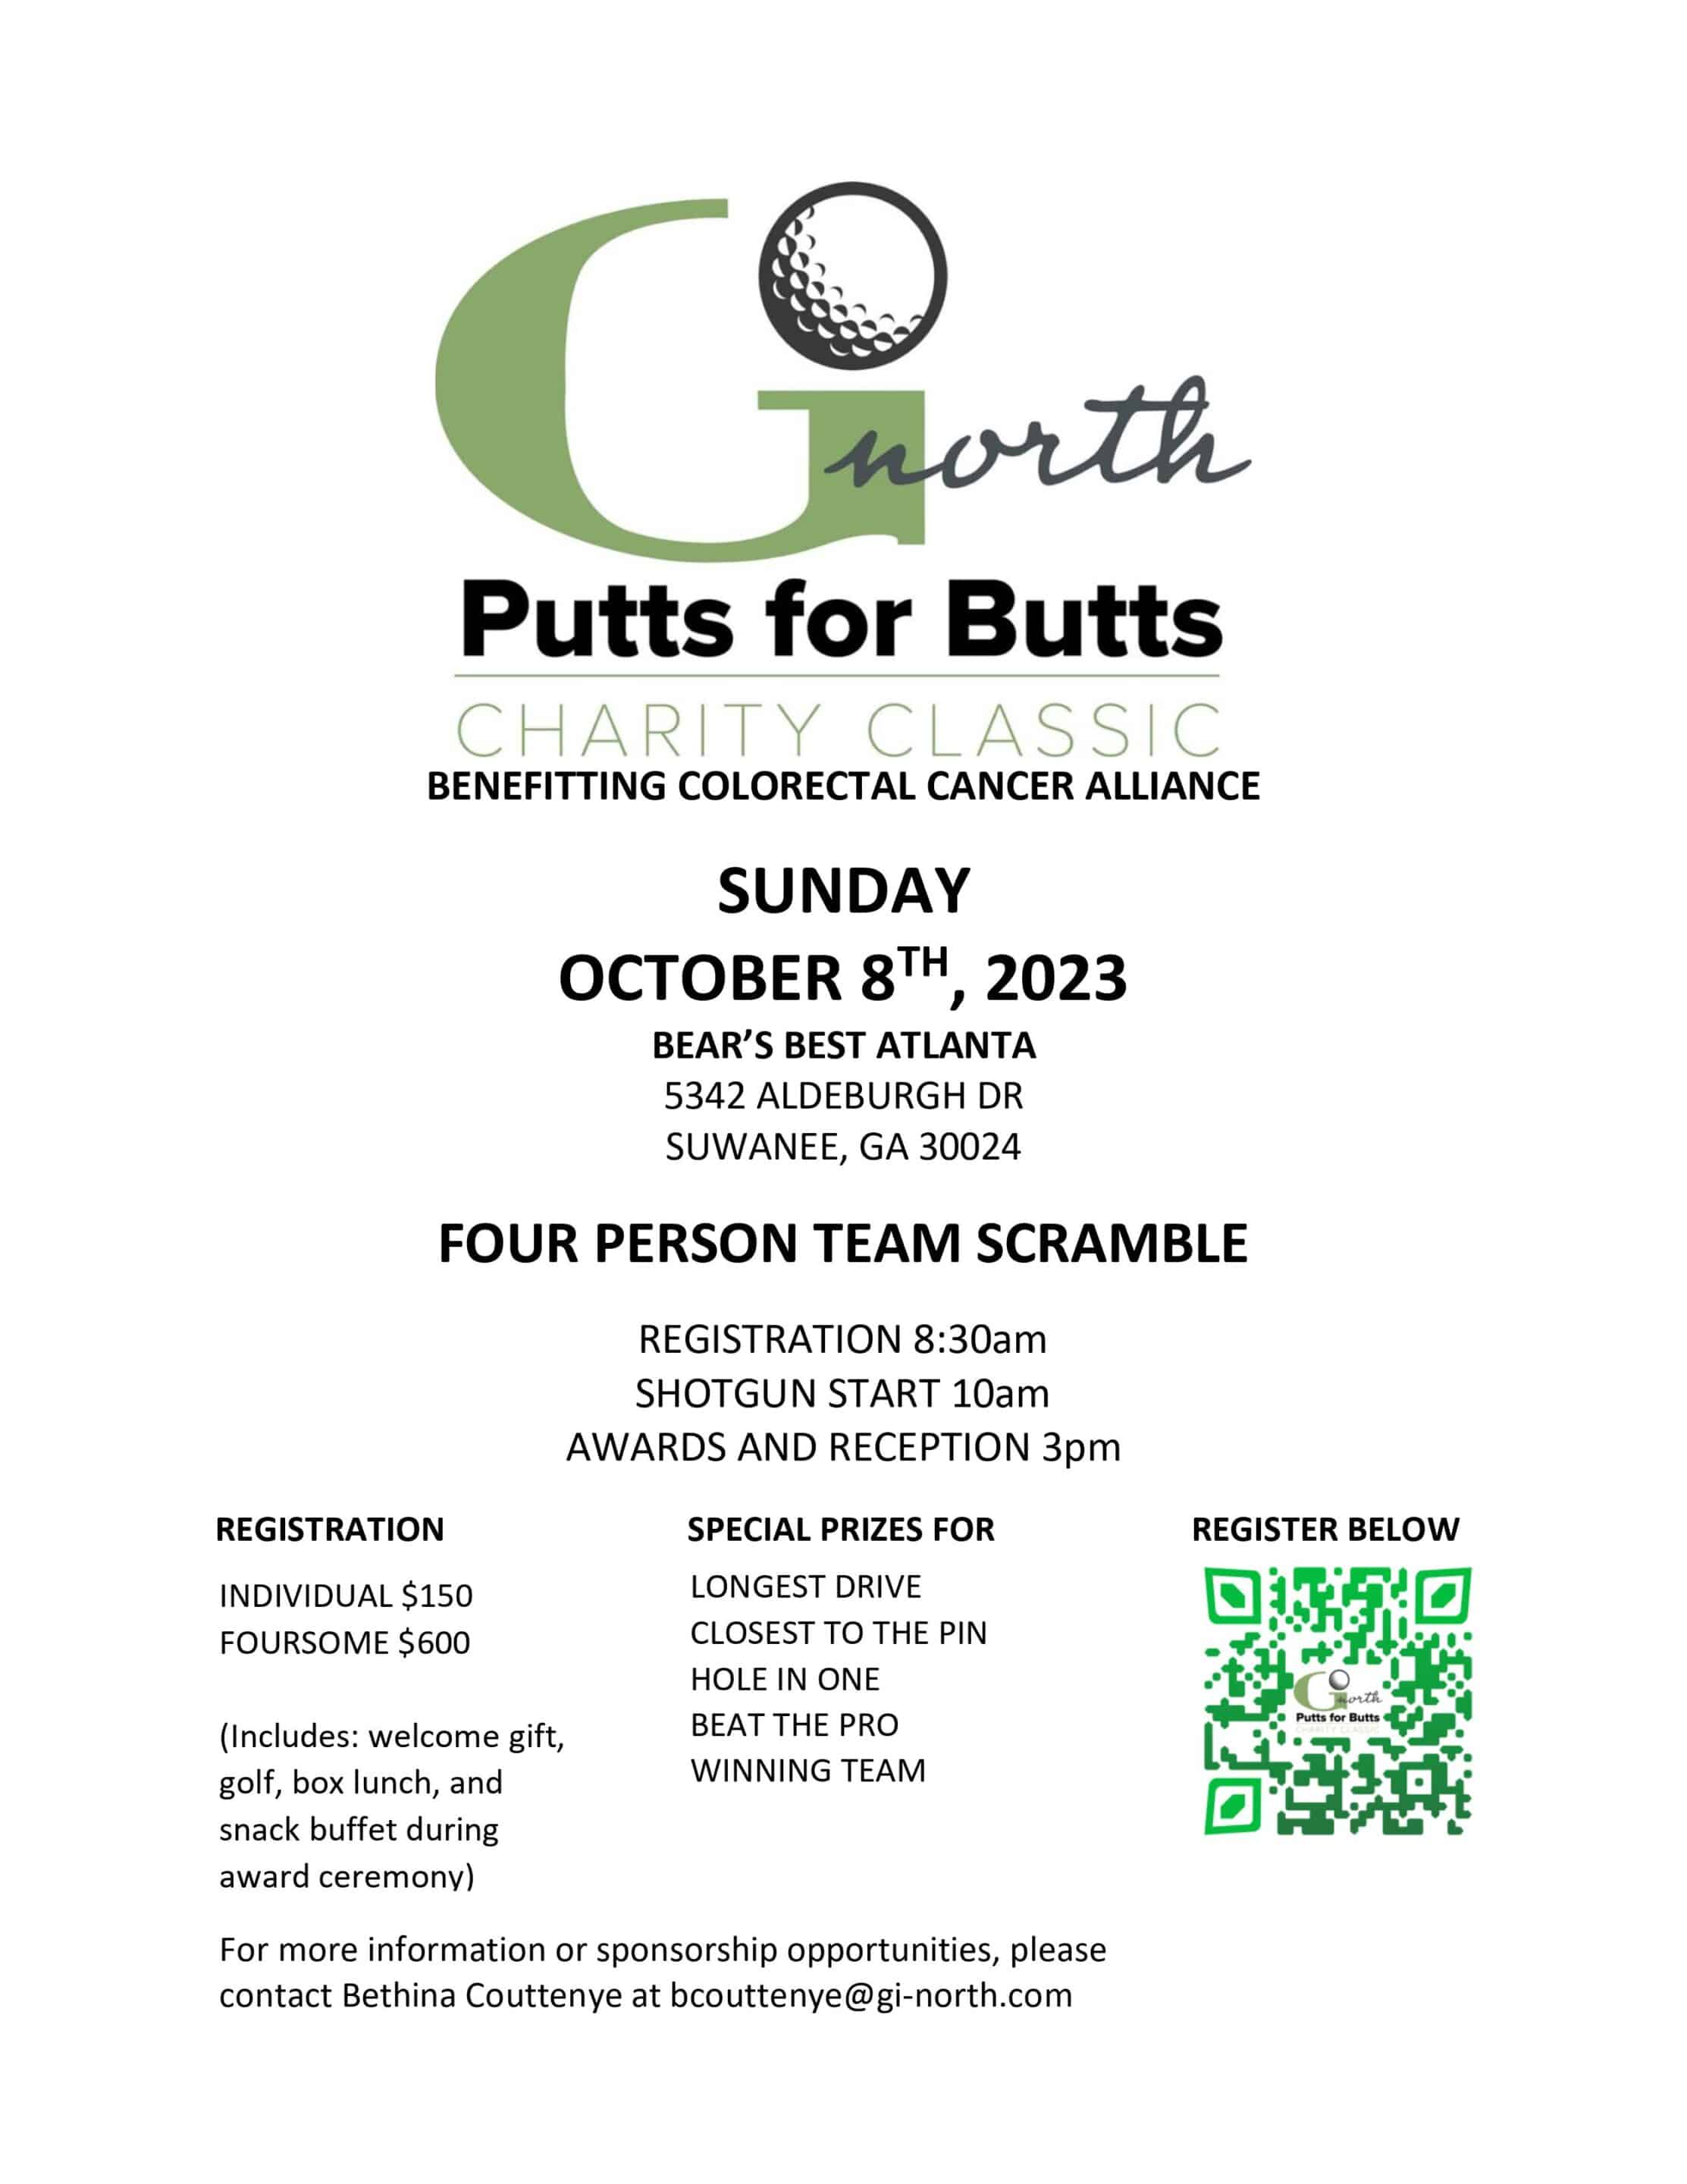 Putts for Butts Golf Charity Classic @ Putts for Butts Golf Charity Classic | | | 